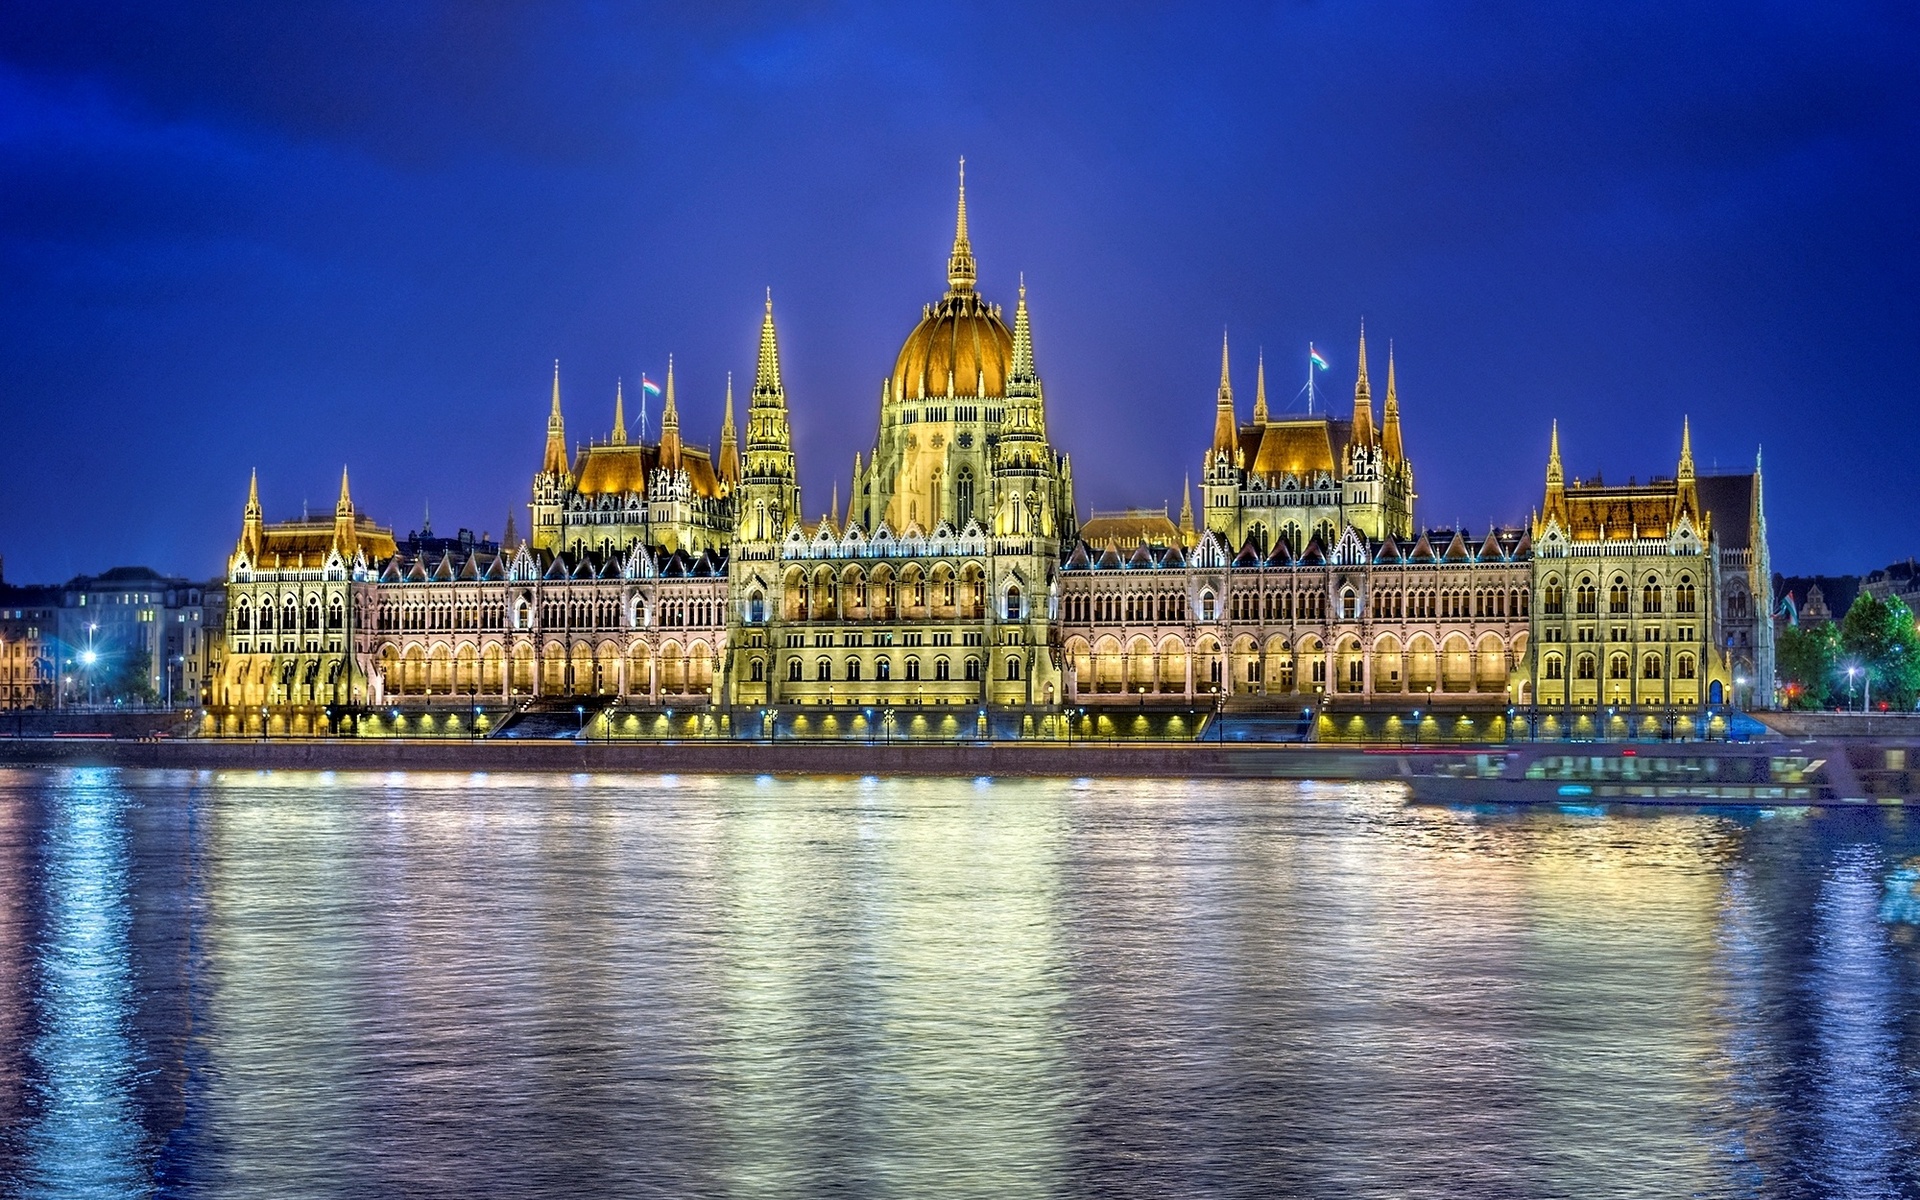 man made, hungarian parliament building, monuments